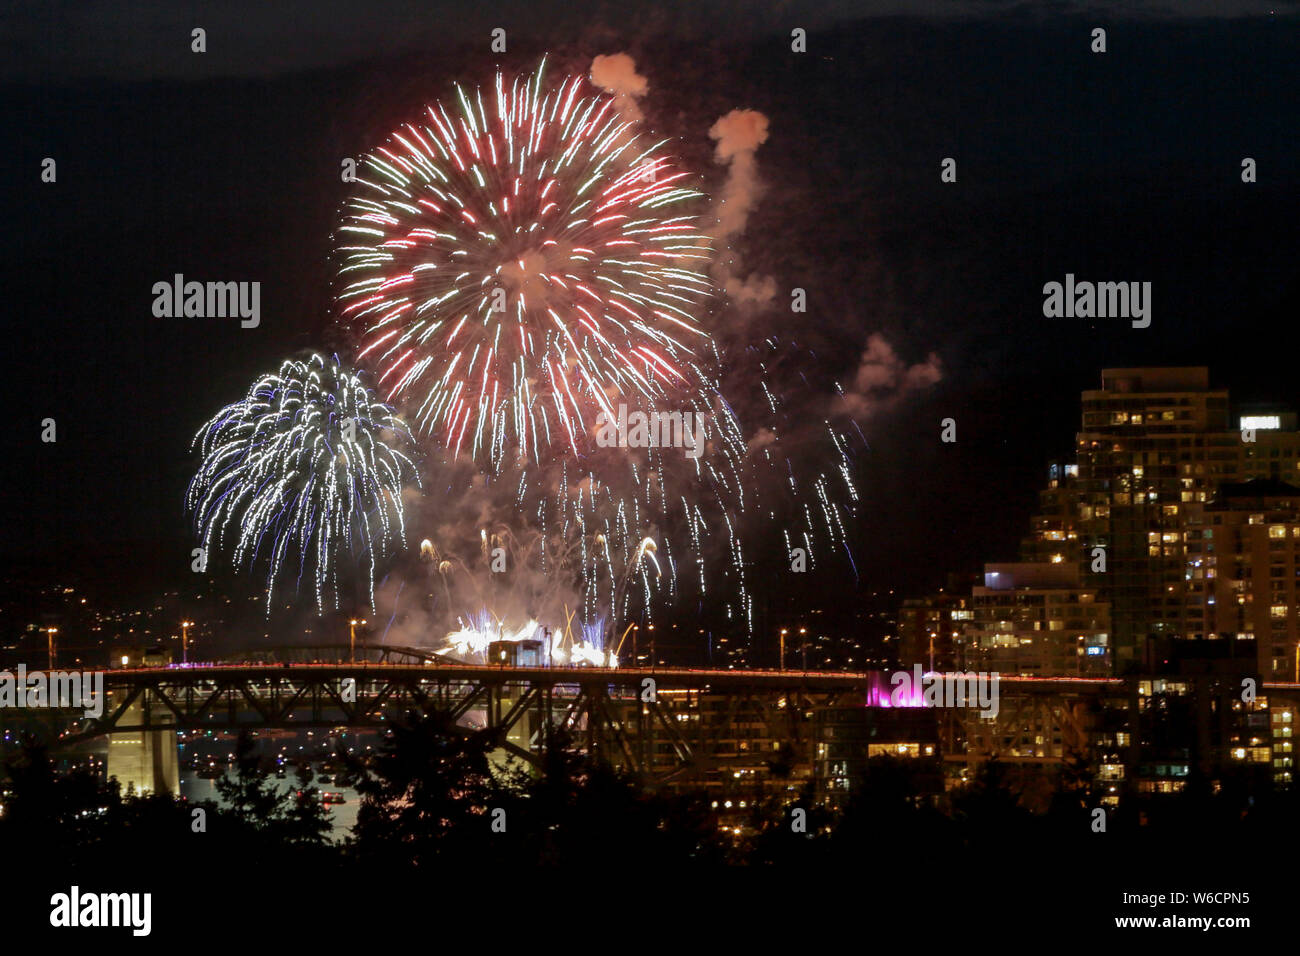 Vancouver, Canada. 31st July, 2019. Team Canada lights up the sky during the Celebration of Light at English Bay in Vancouver, Canada, July 31, 2019. Team Canada lighted up the night sky with fireworks as part of the annual Honda Celebration of Light, which attracted hundred of thousands people to attend. (Photo by Liang Sen/Xinhua) Credit: Xinhua/Alamy Live News Stock Photo